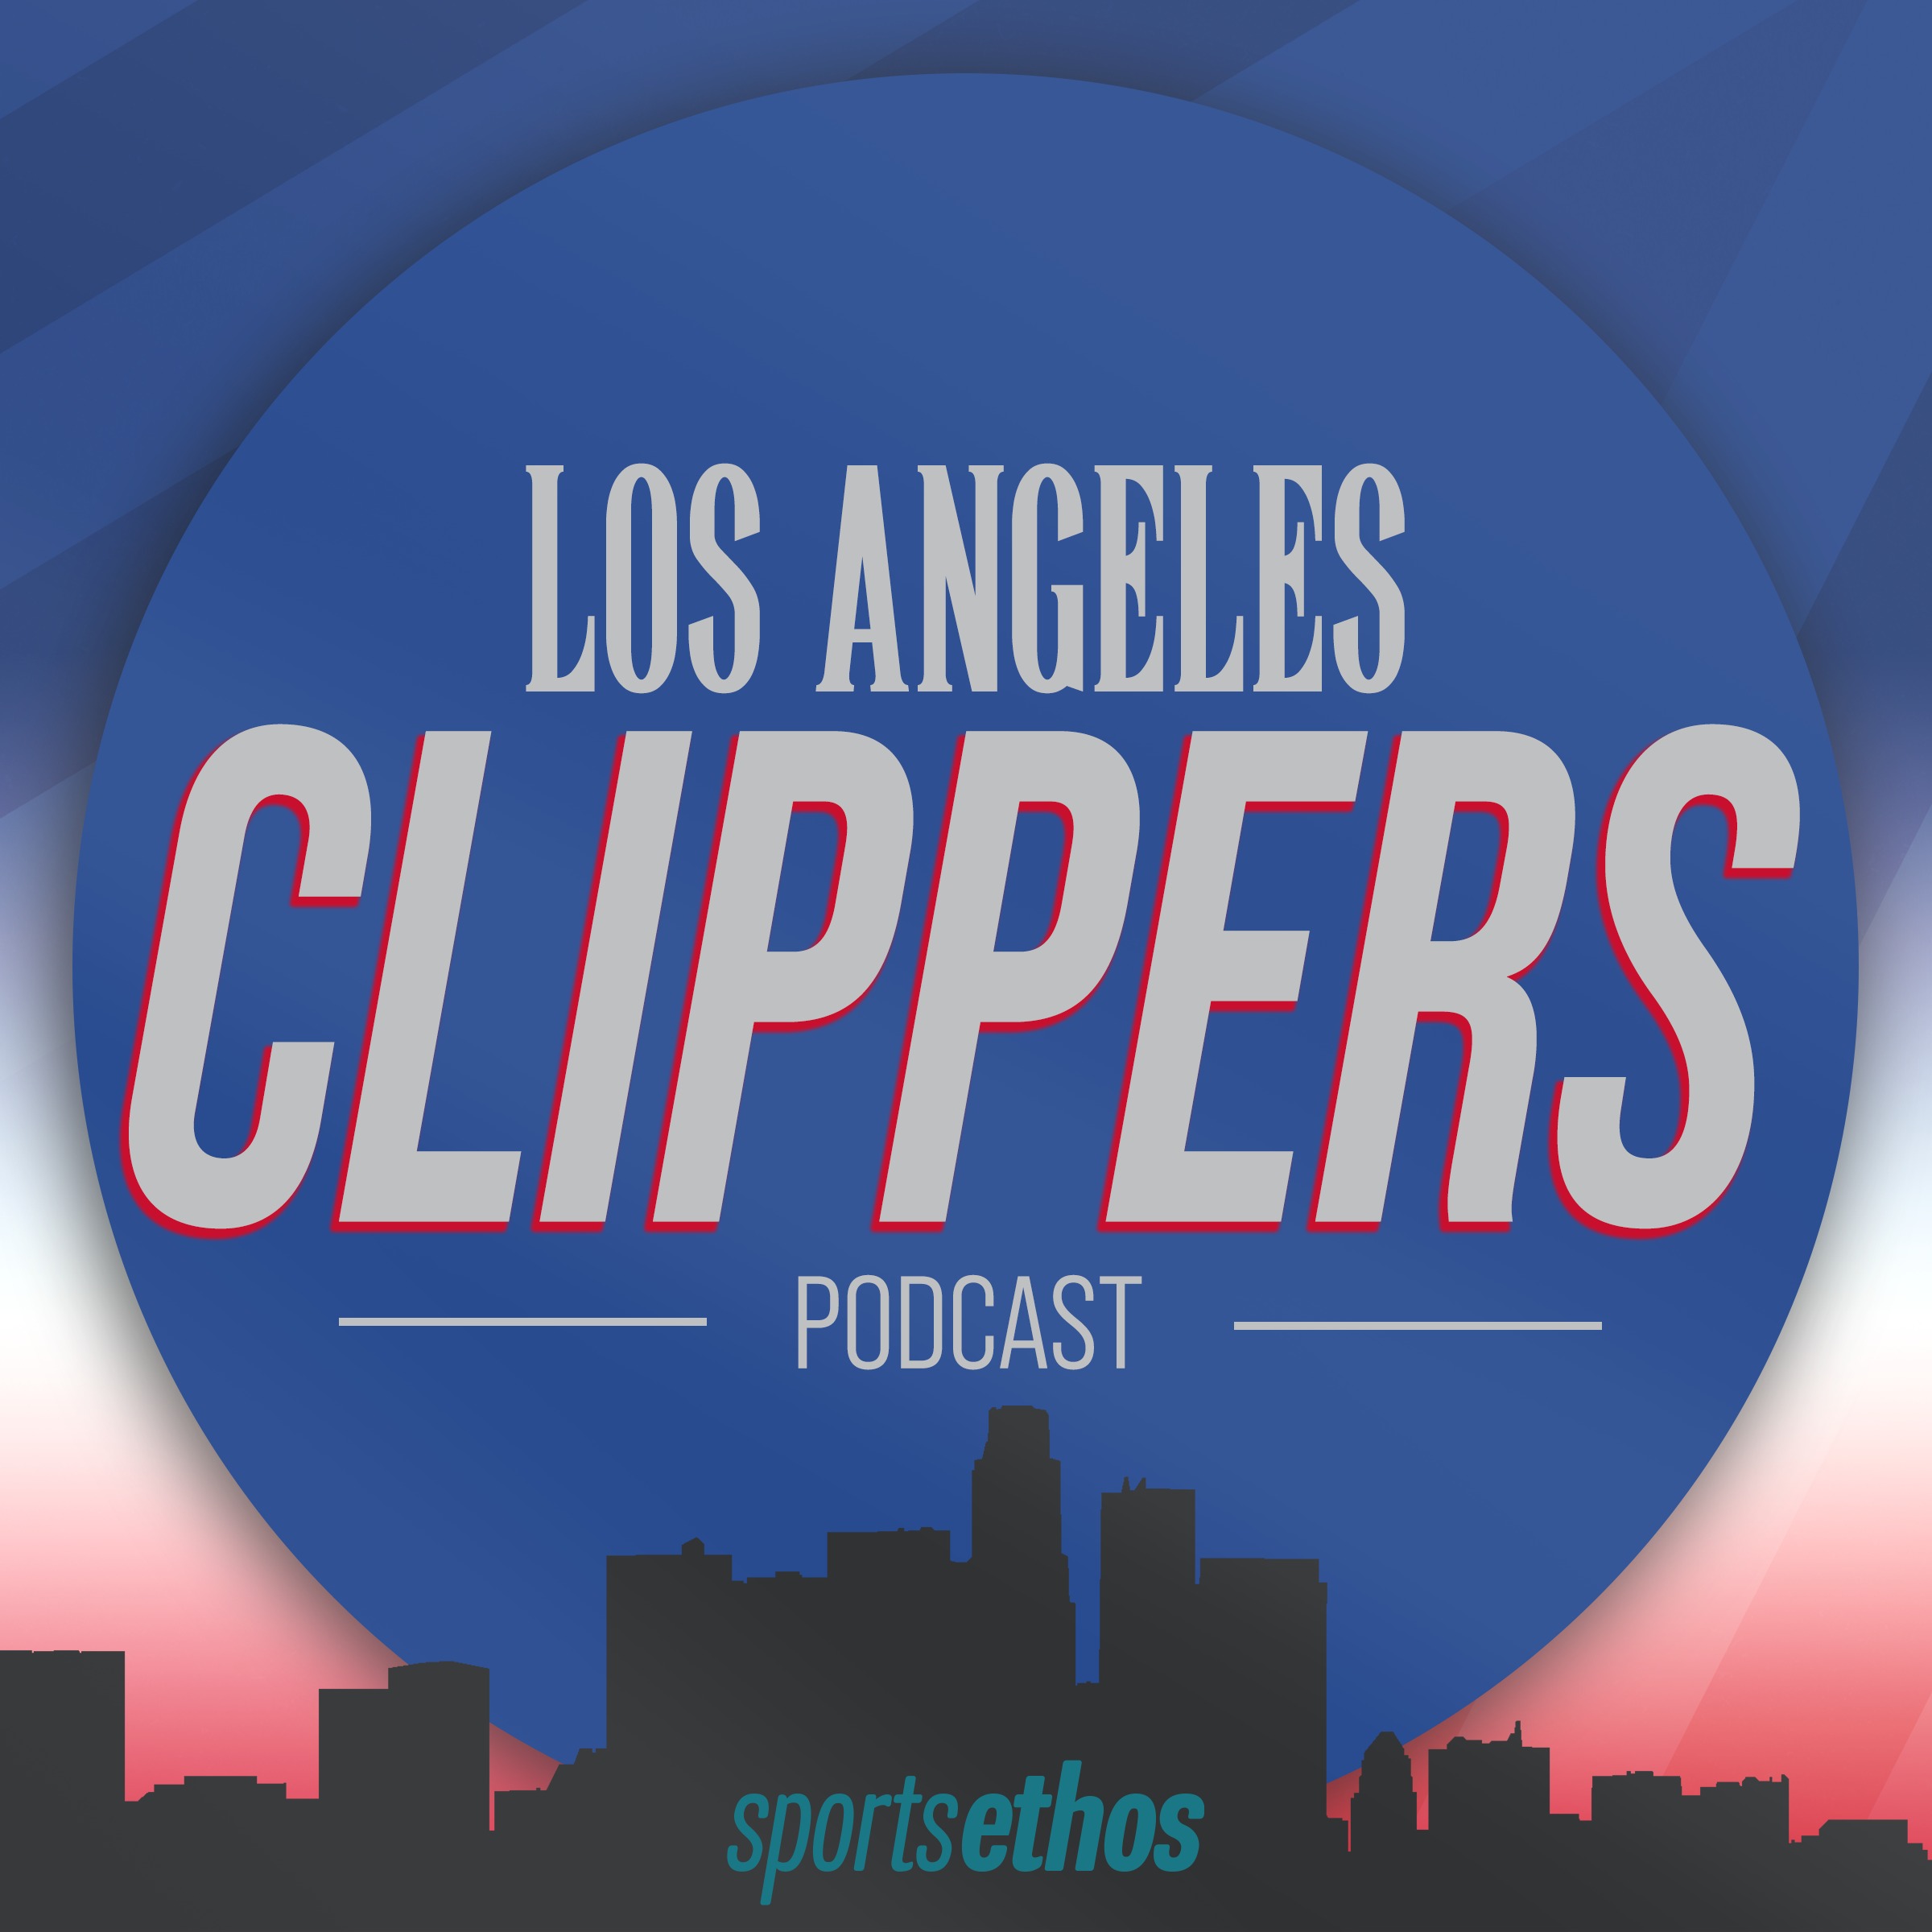 SportsEthos Clippers podcast